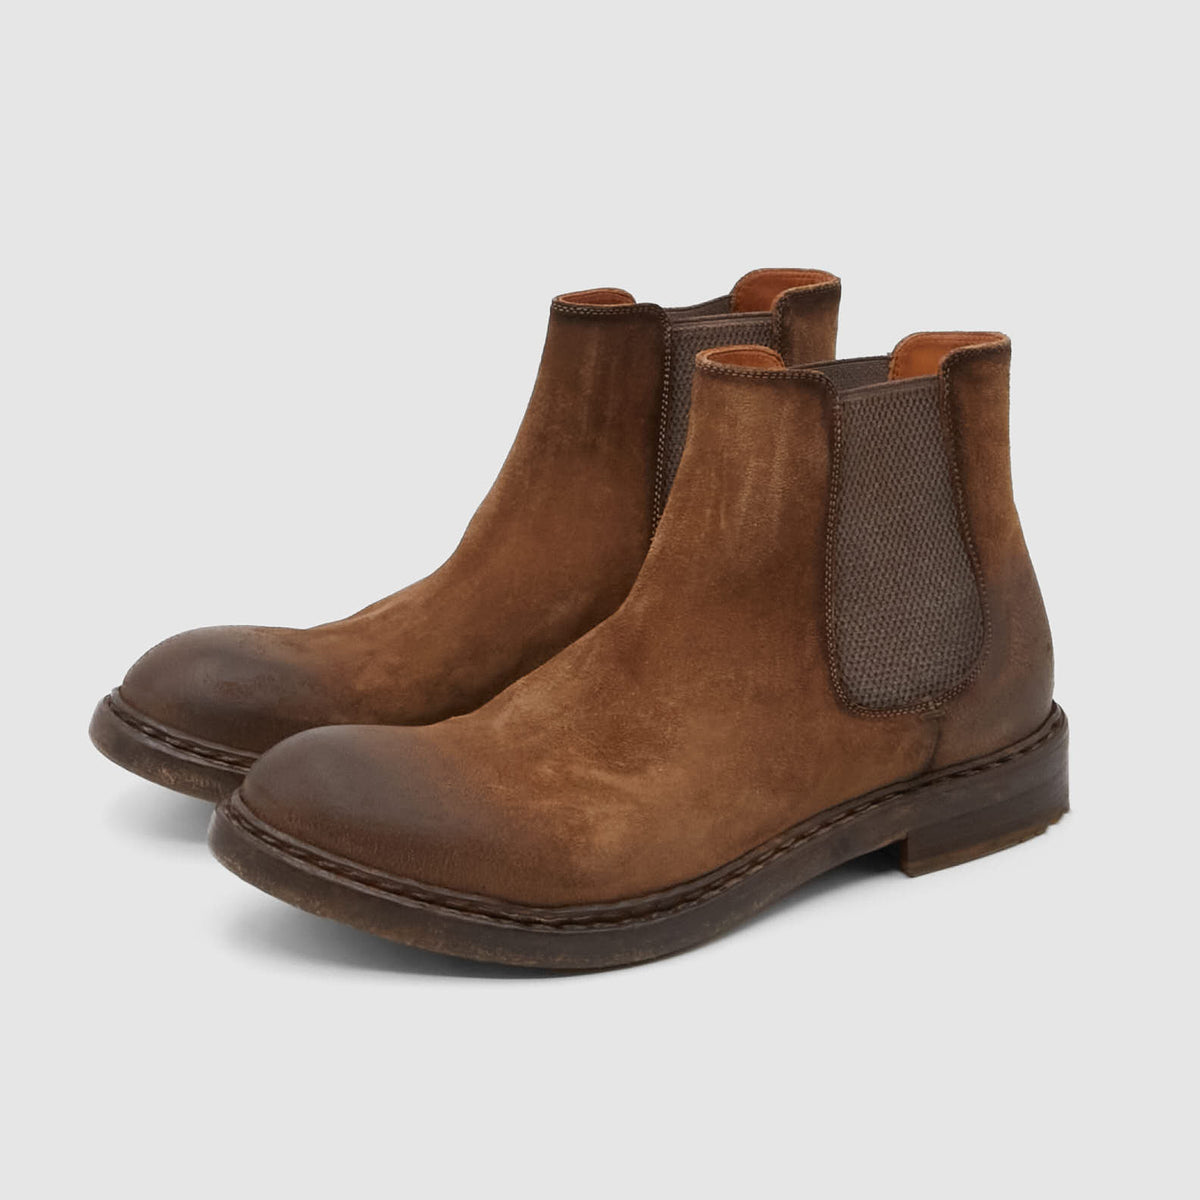 Crispiniano Roughout Suede Chelsea Boot